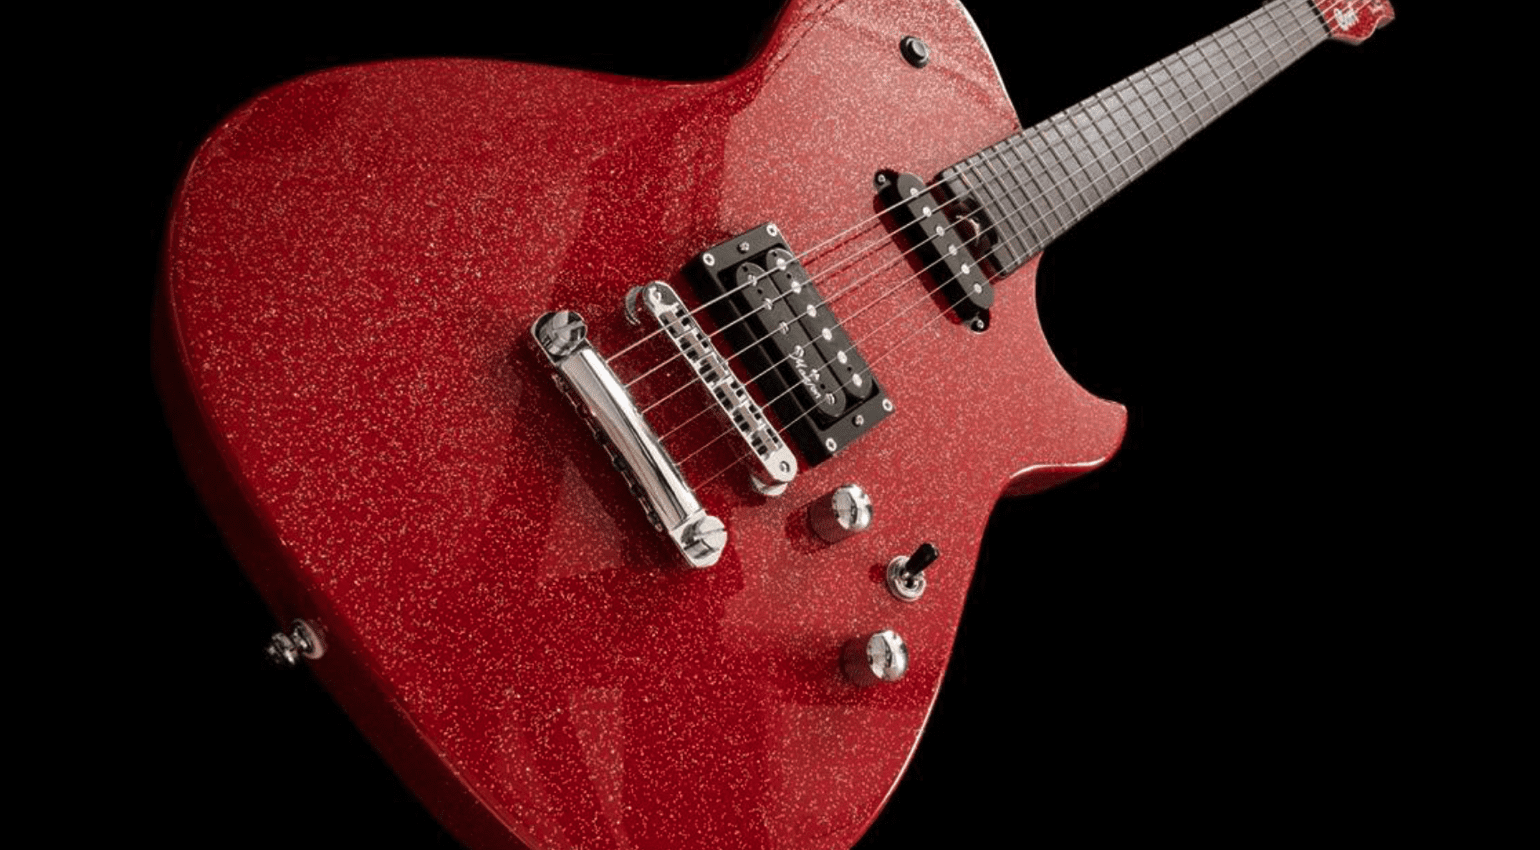 Manson Guitar Works and Cort have announced a new Red Sparkle MBC-1